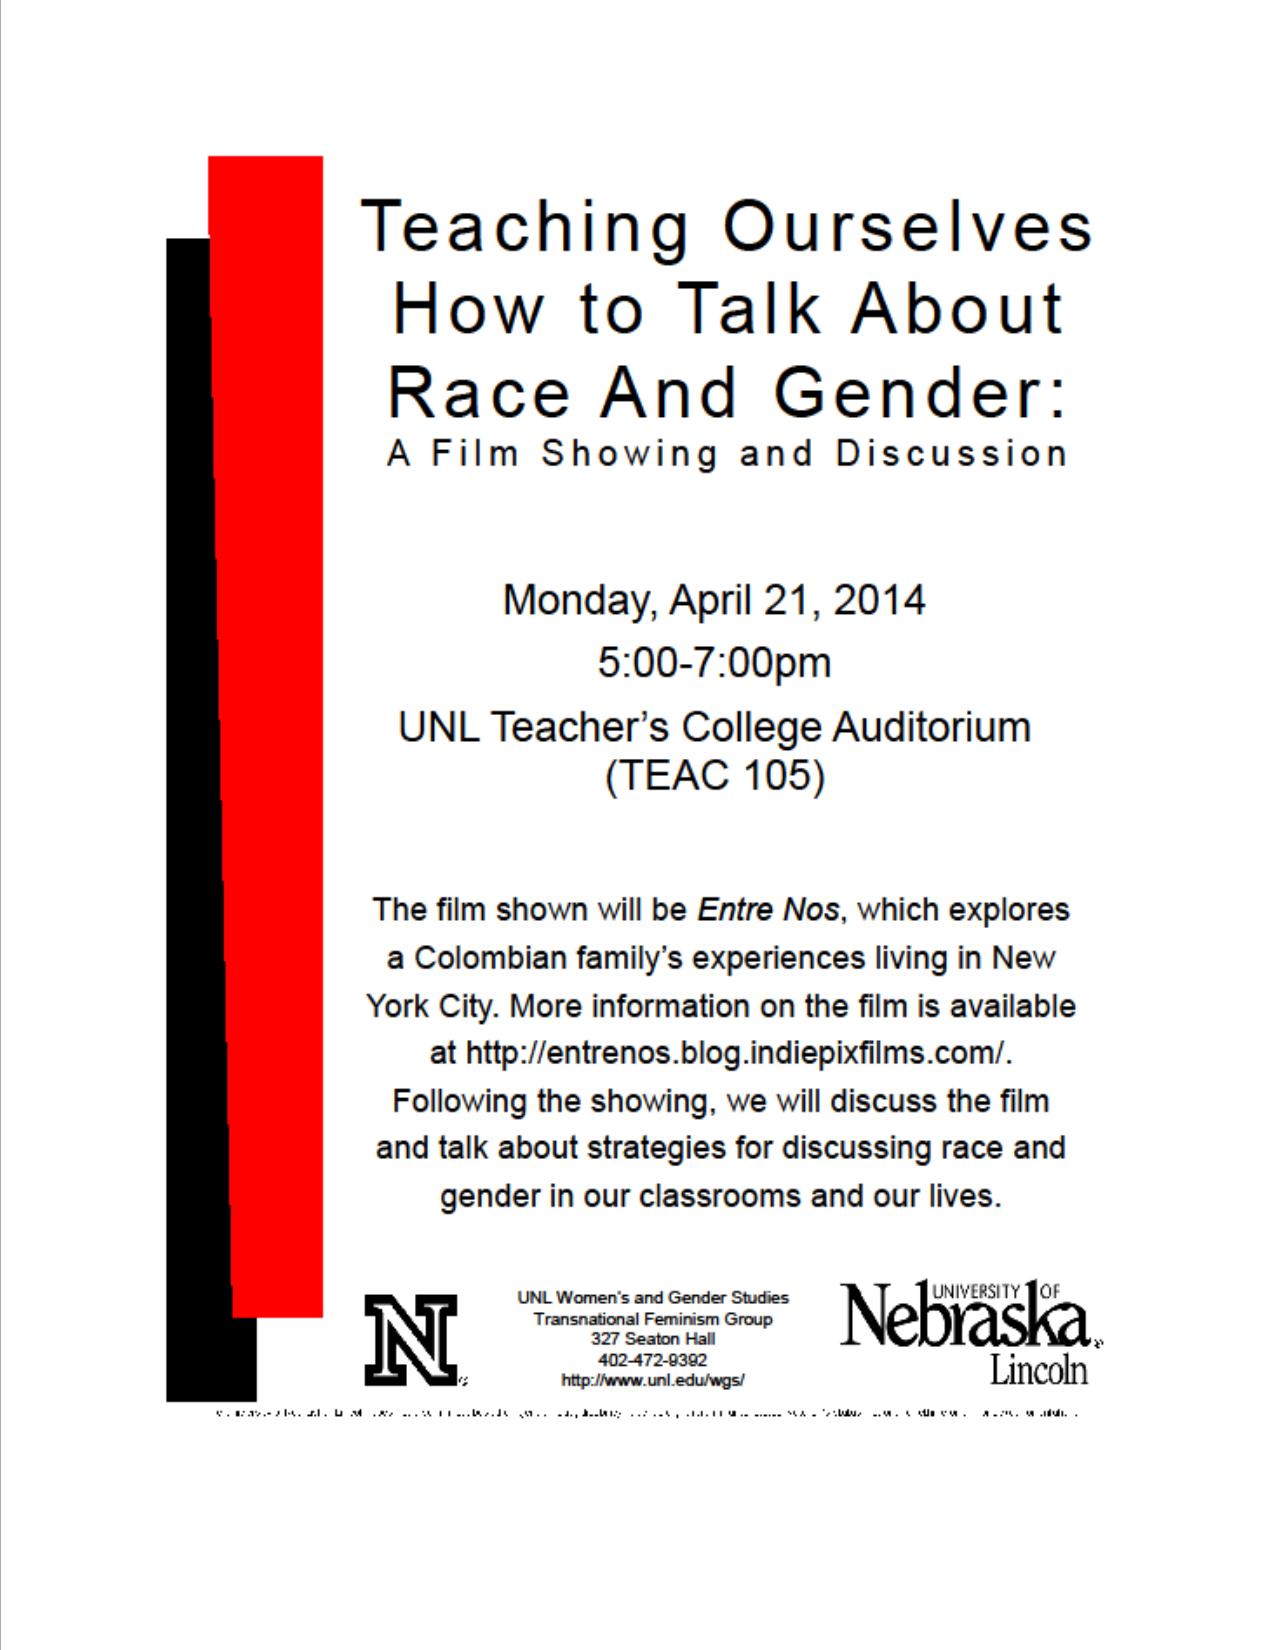 Monday April 21st from 5-7pm located in Teacher's College Auditorium (TEAC 105)